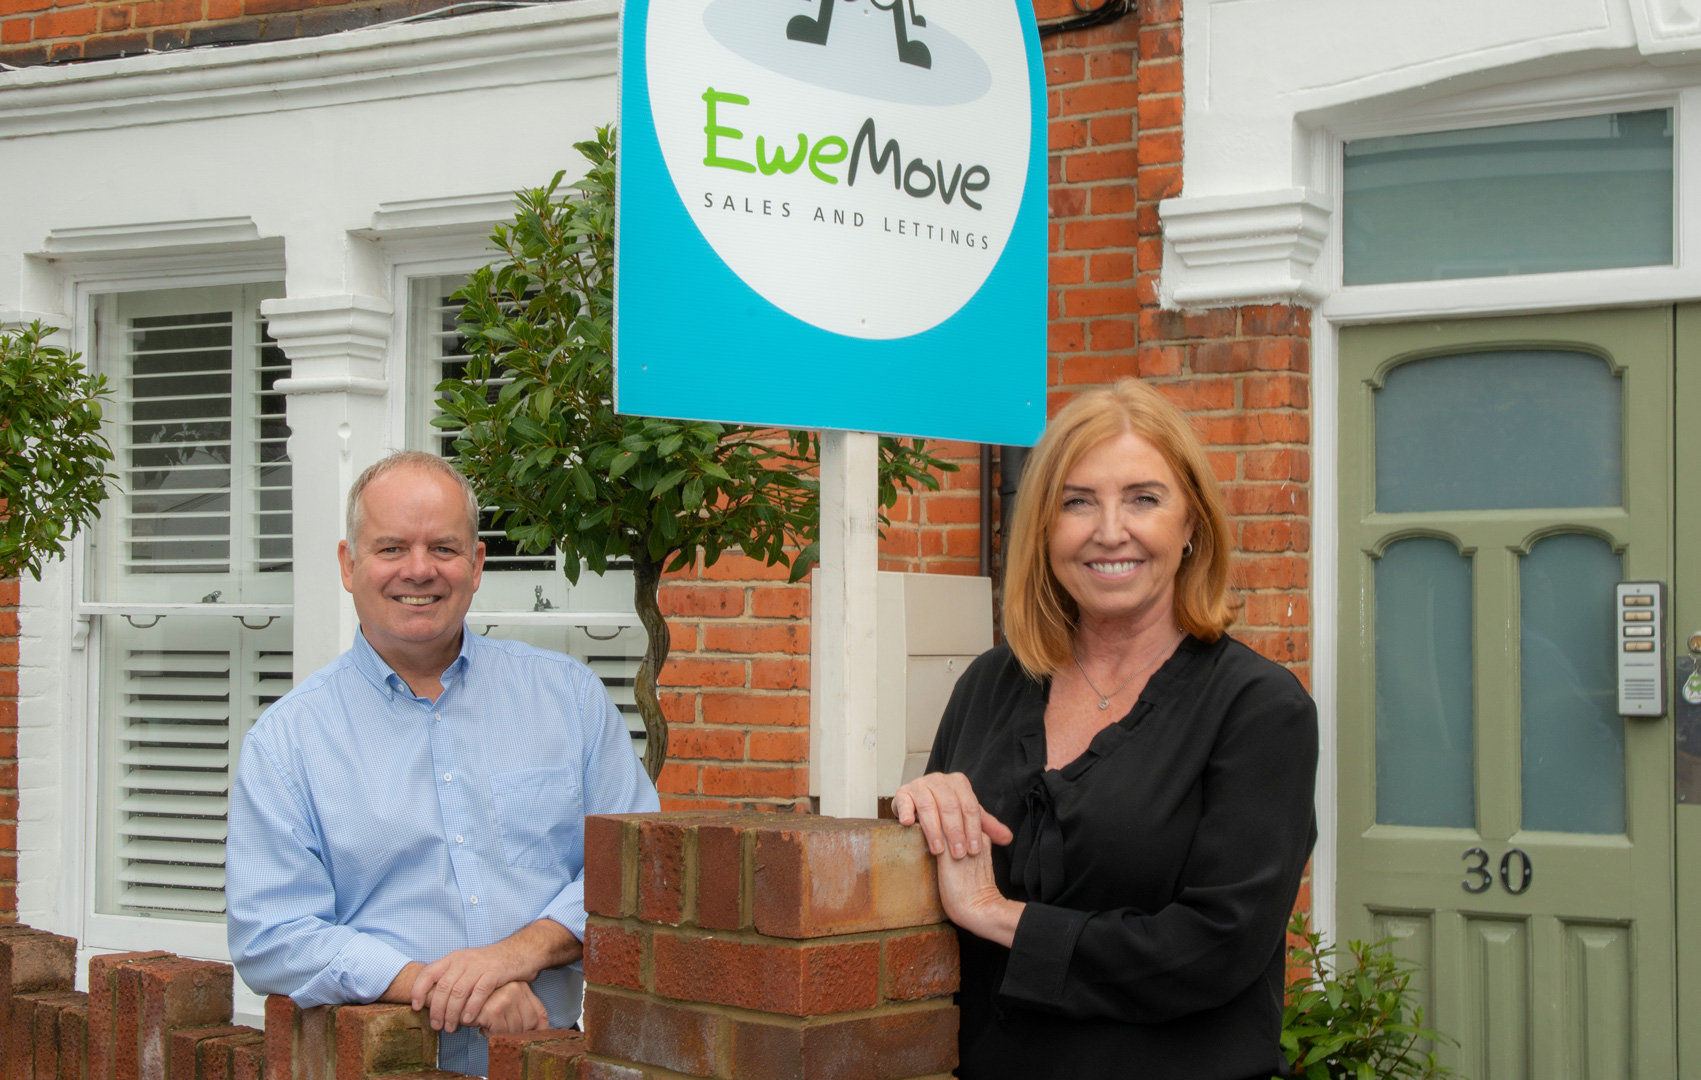 Chiswick Estate Agency: EweMove – A Different Way To Do Business